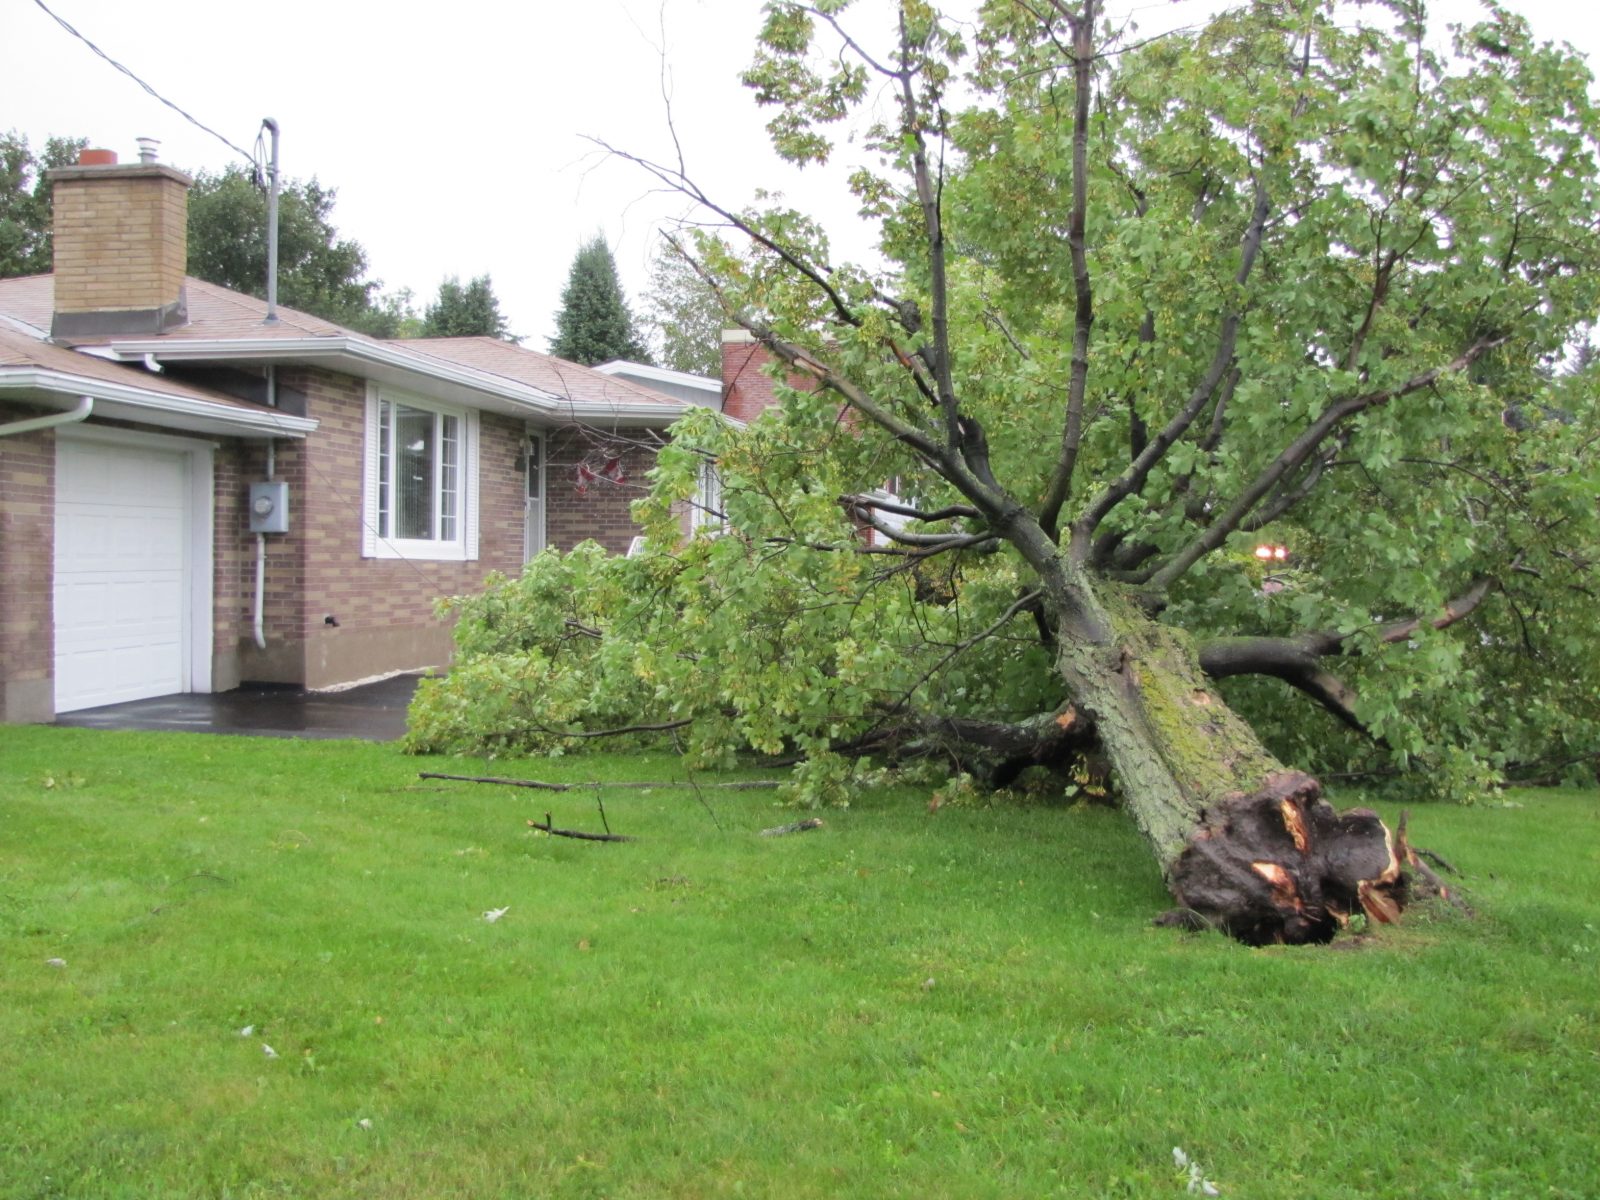 UPDATE: Storm batters Cornwall area, trees snapped